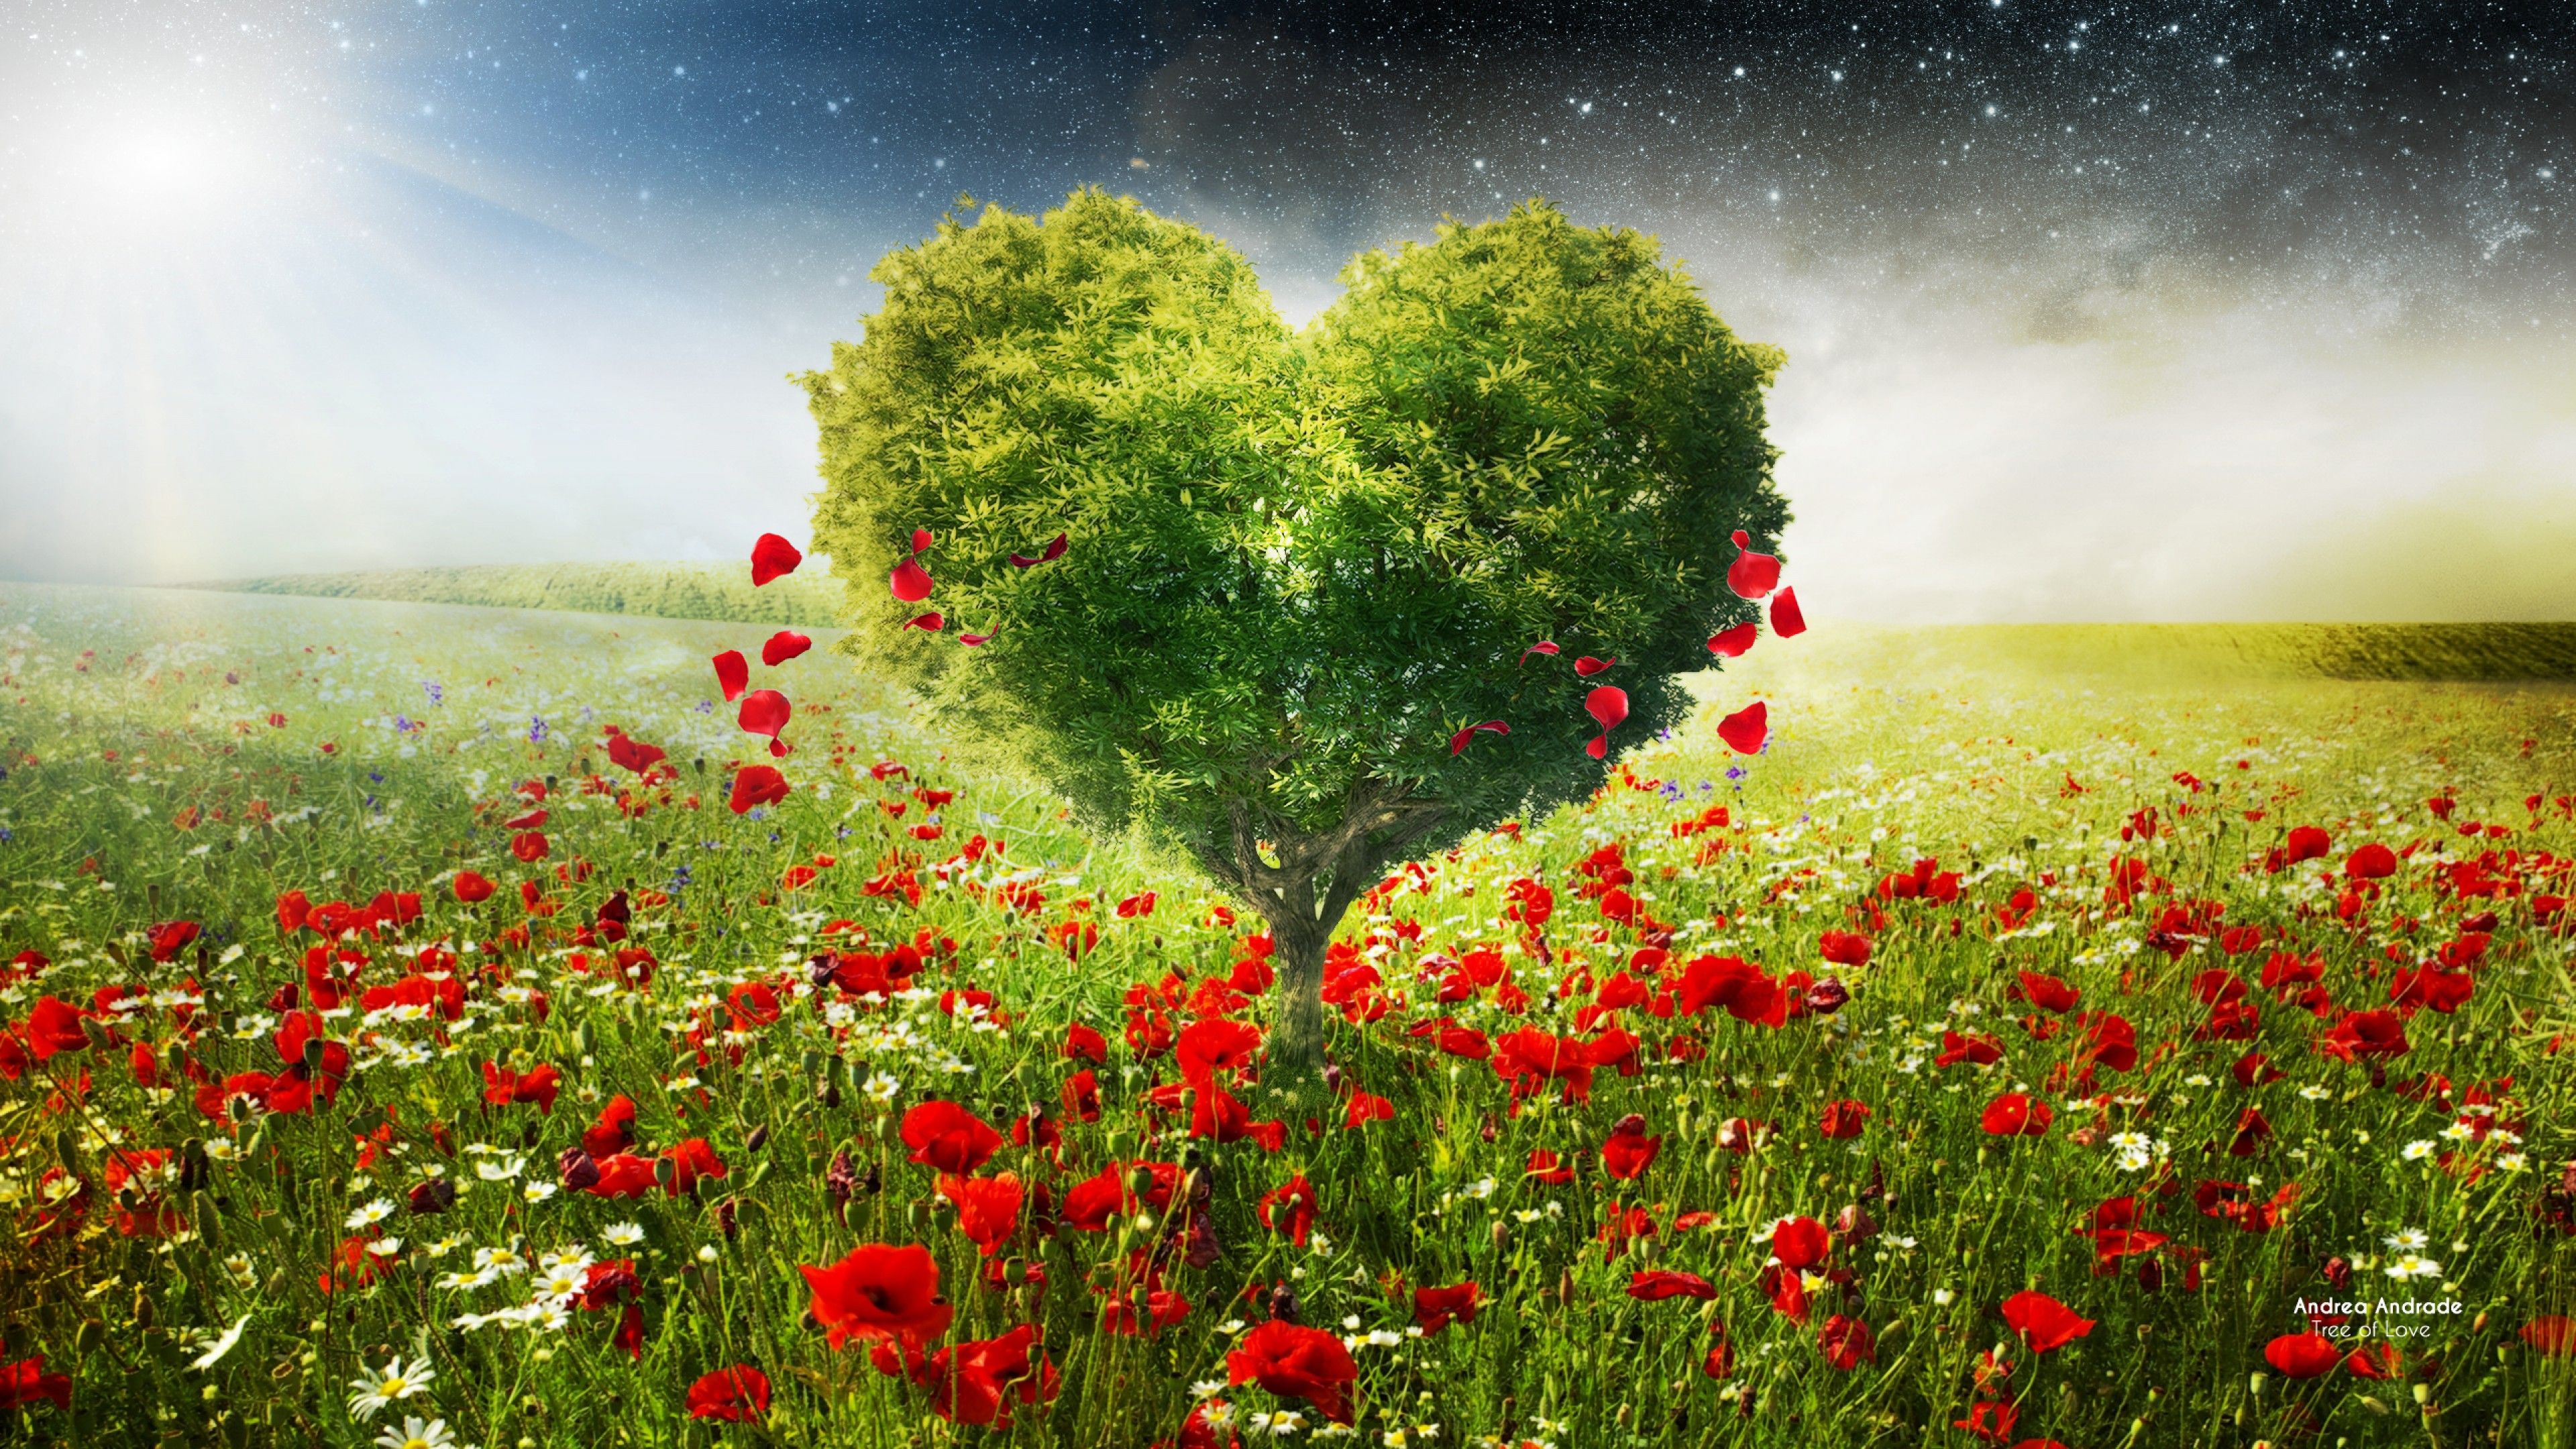 Free Green Heart Tree Poppies Hd Wallpapers for Desktop and Mobiles 4K Ultr...